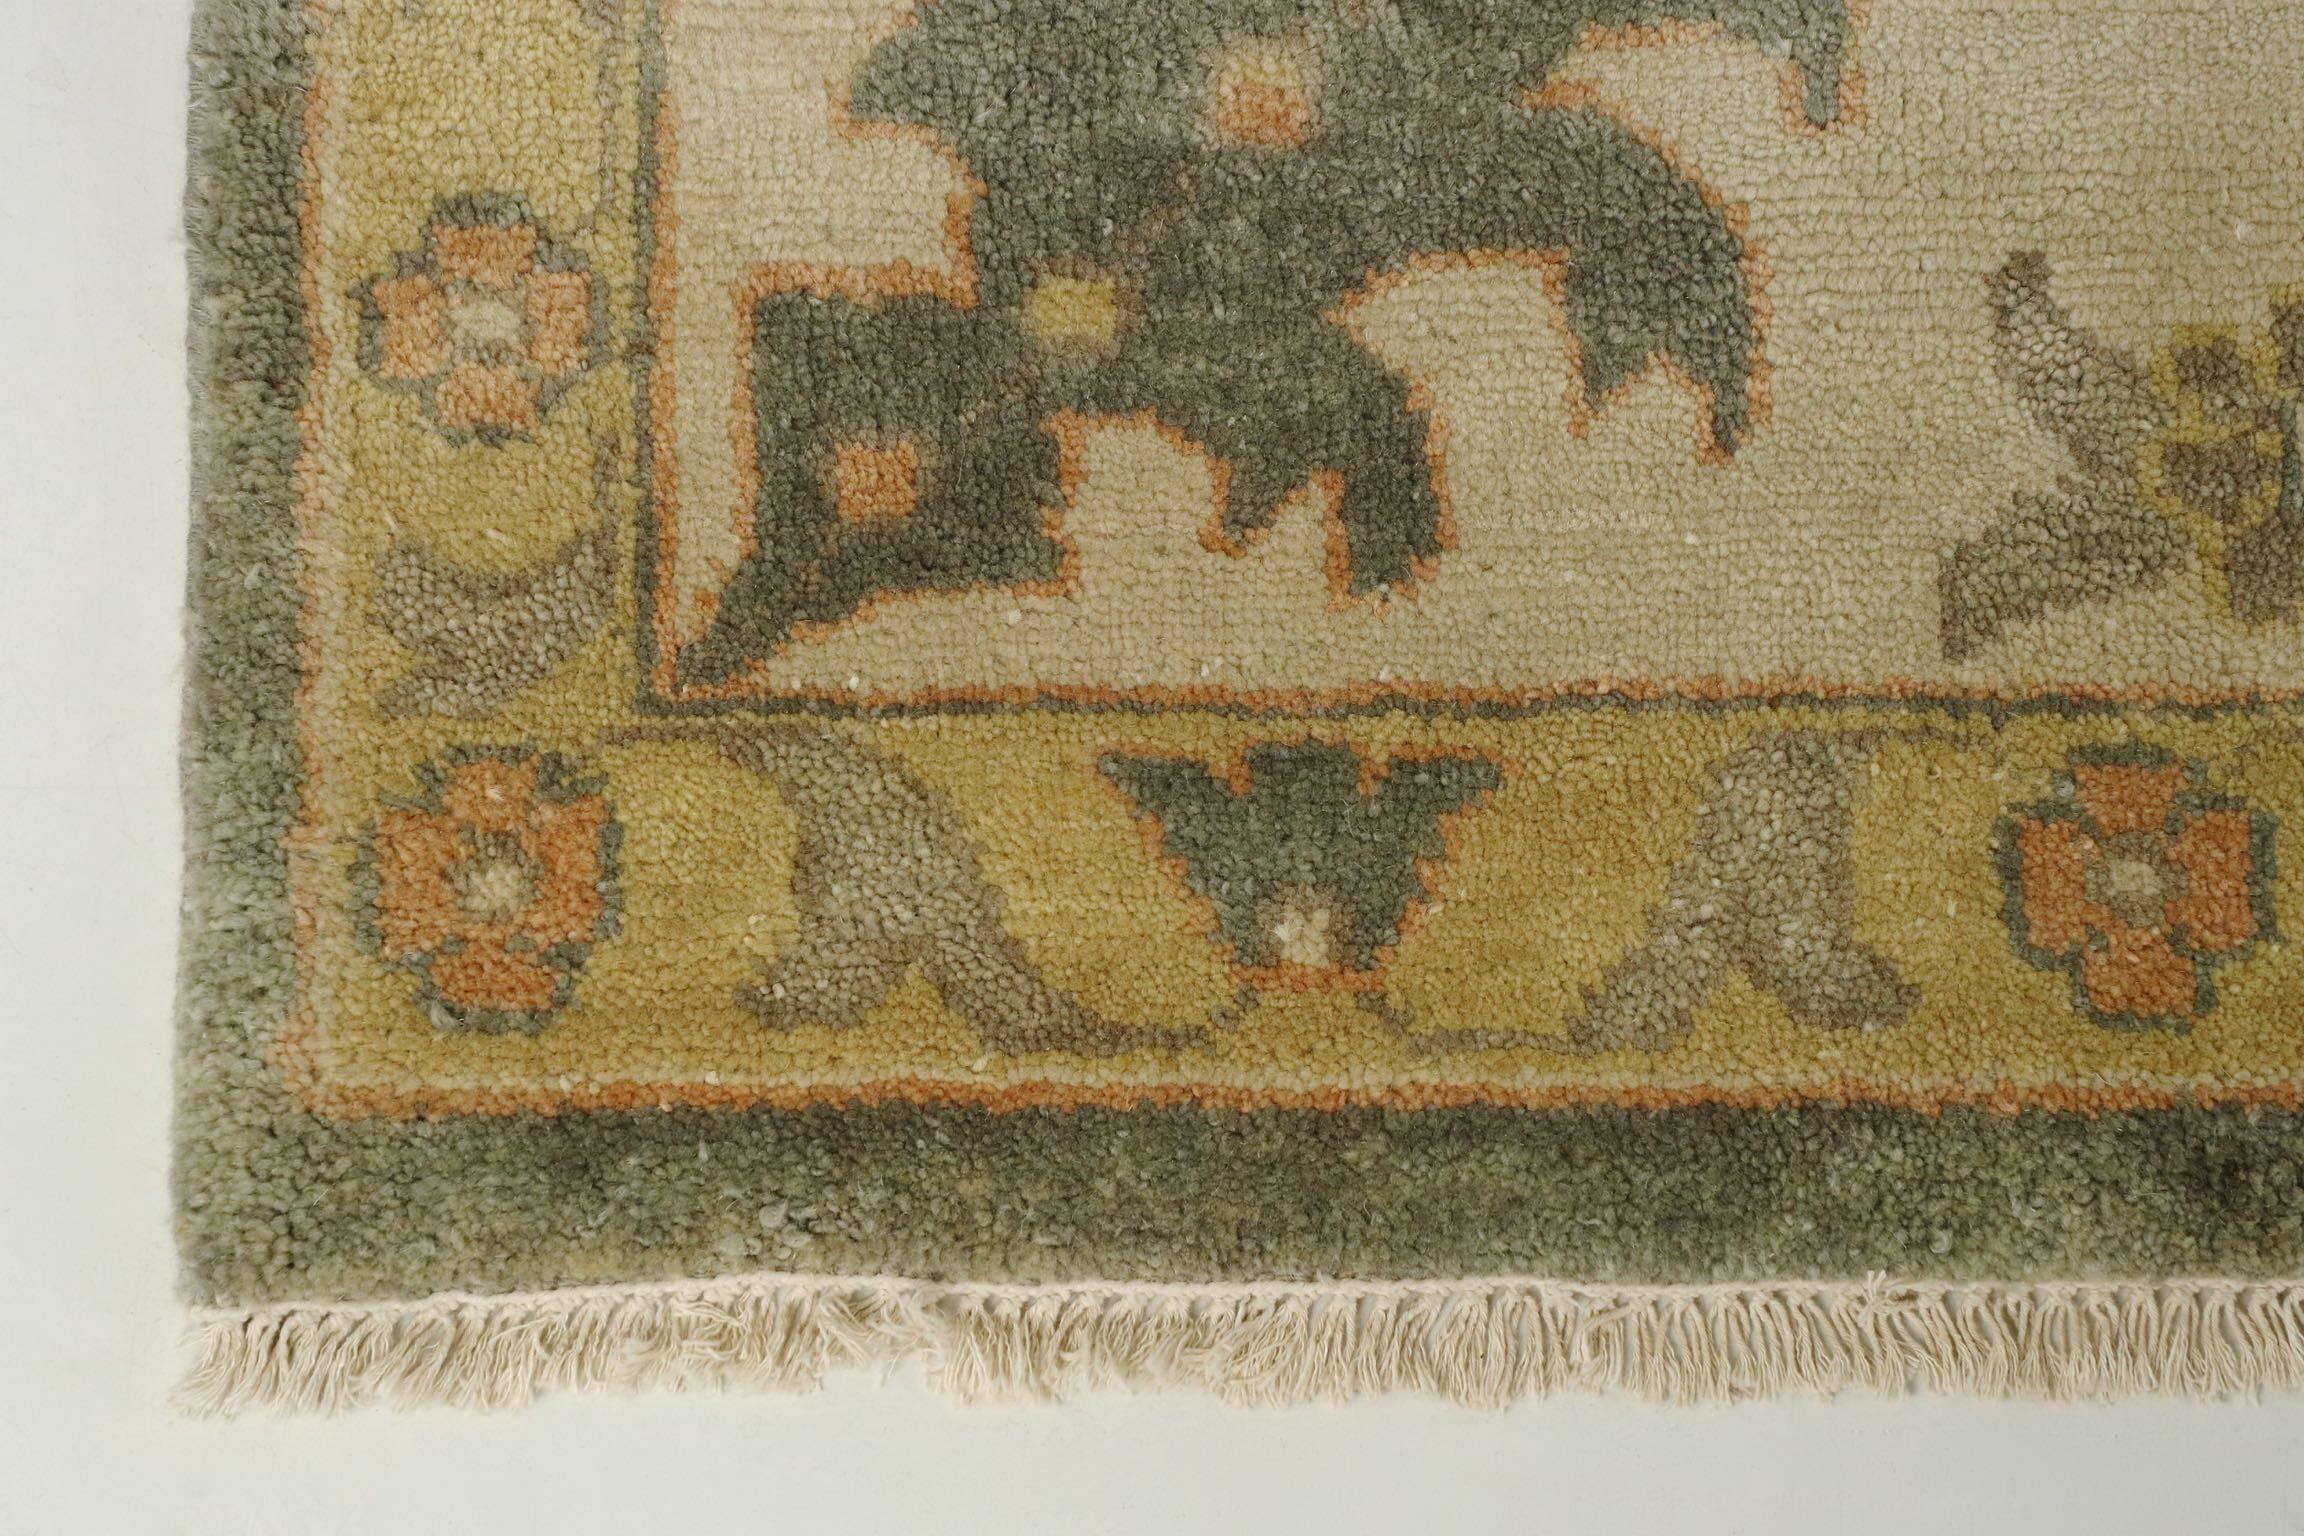 A classic rug design that borrows heavily from the classical Persian motifs of the 19th century, this piece is beautifully hand-knotted with an attractive low-chroma palette.  The low saturation tealish-gray of the primary ground allows a sharp